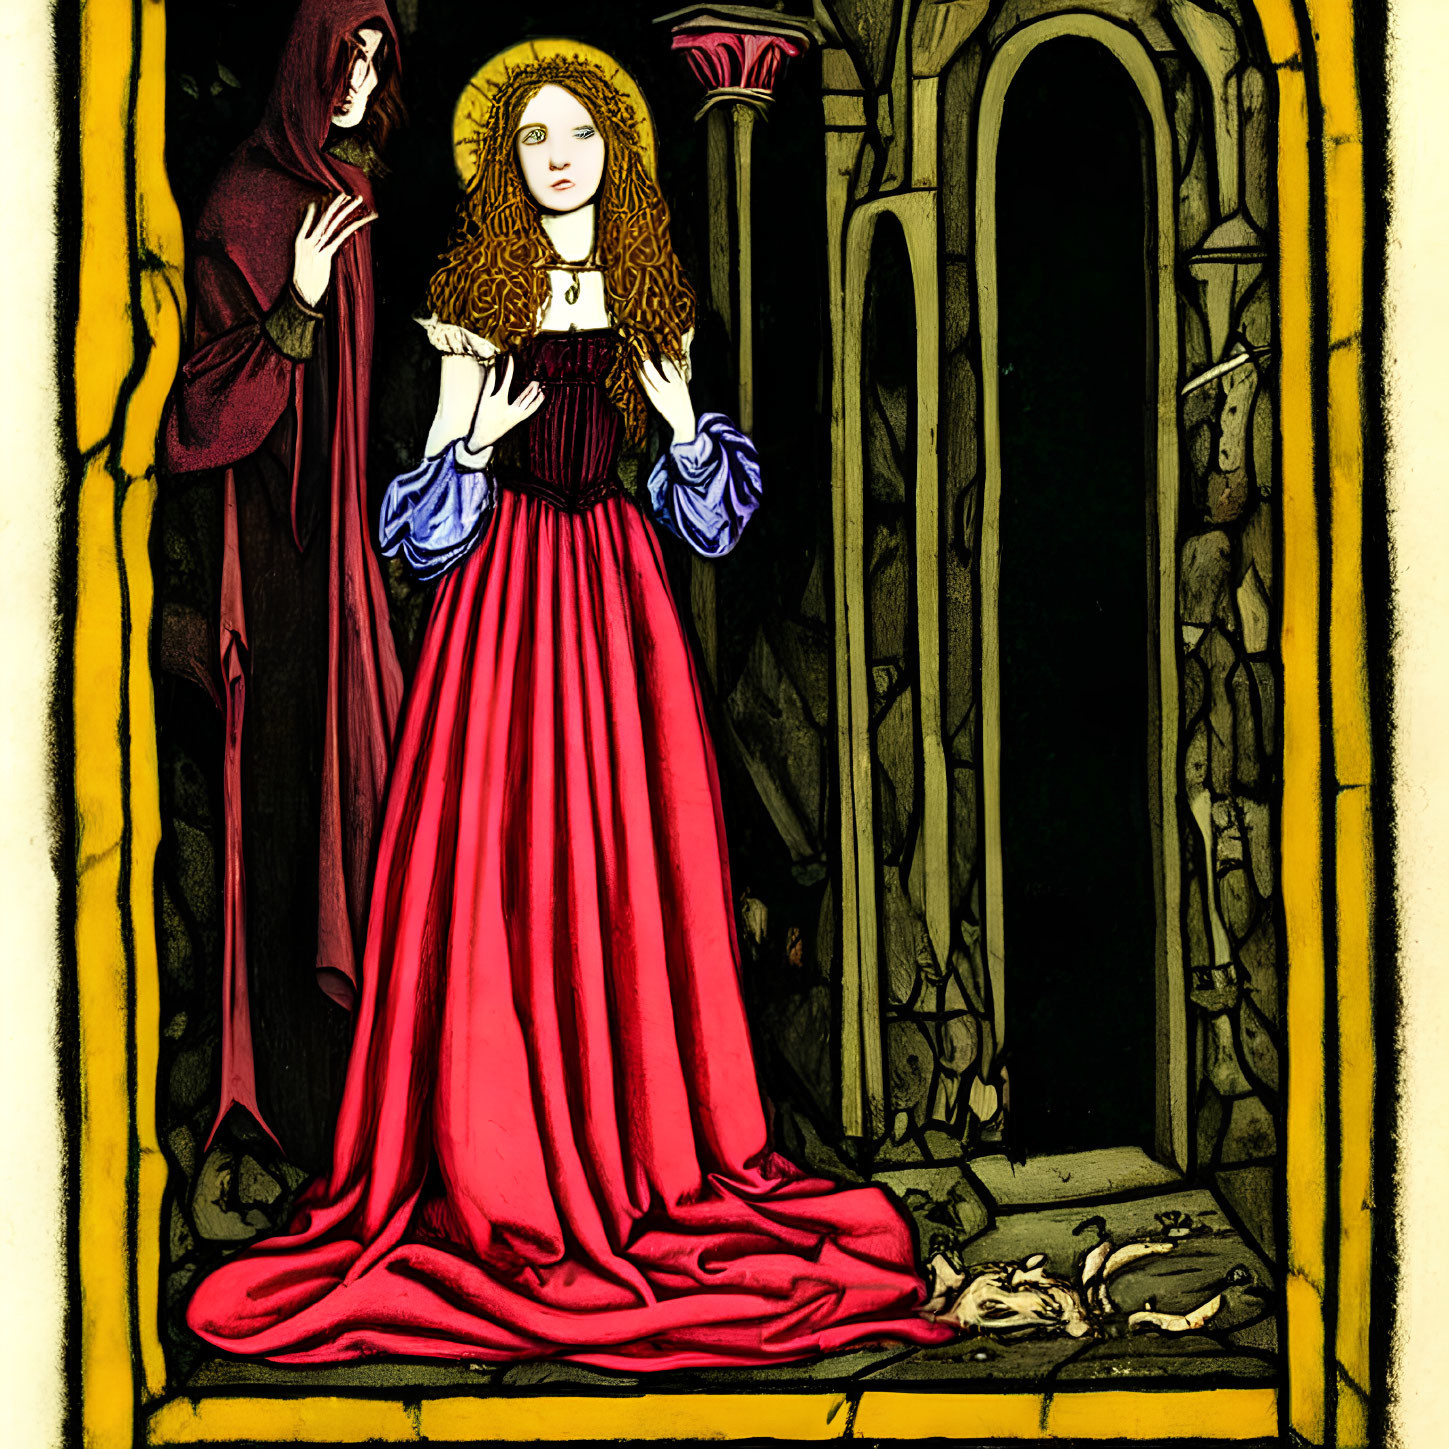 Illustration of woman in red dress with hooded figure in purple in Gothic setting